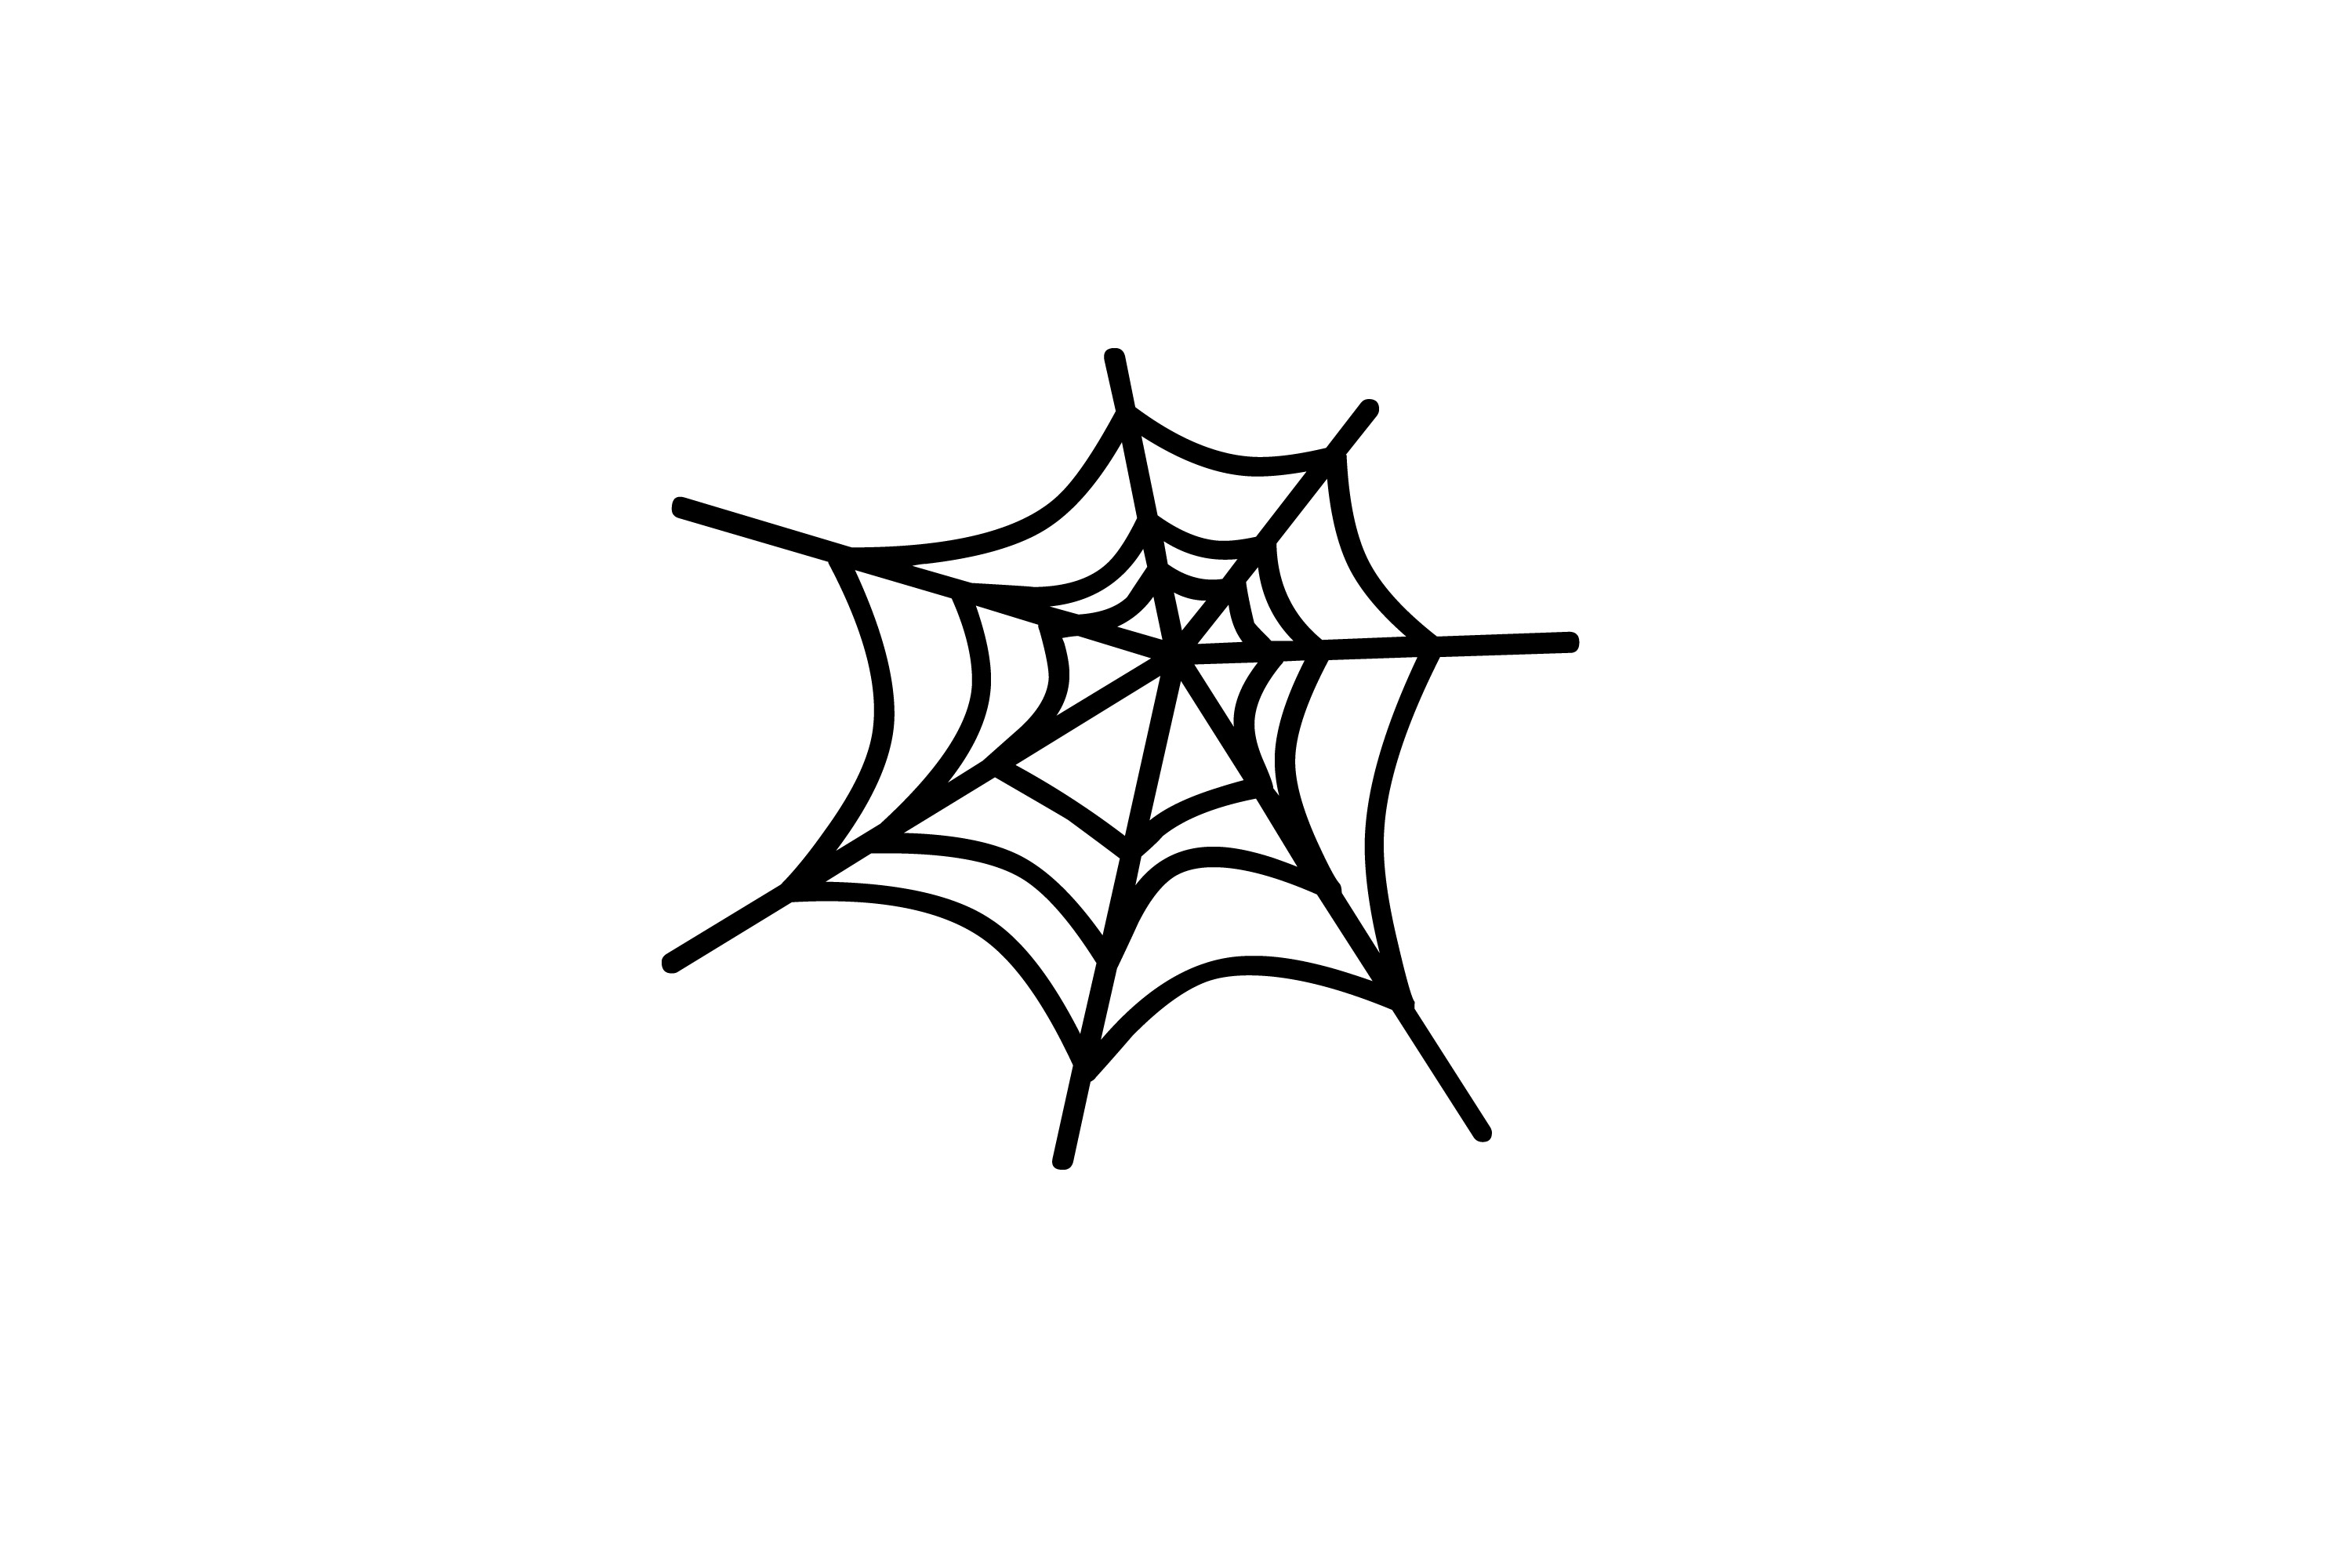 Spider Web Border Clipart | Clipart library - Free Clipart Images